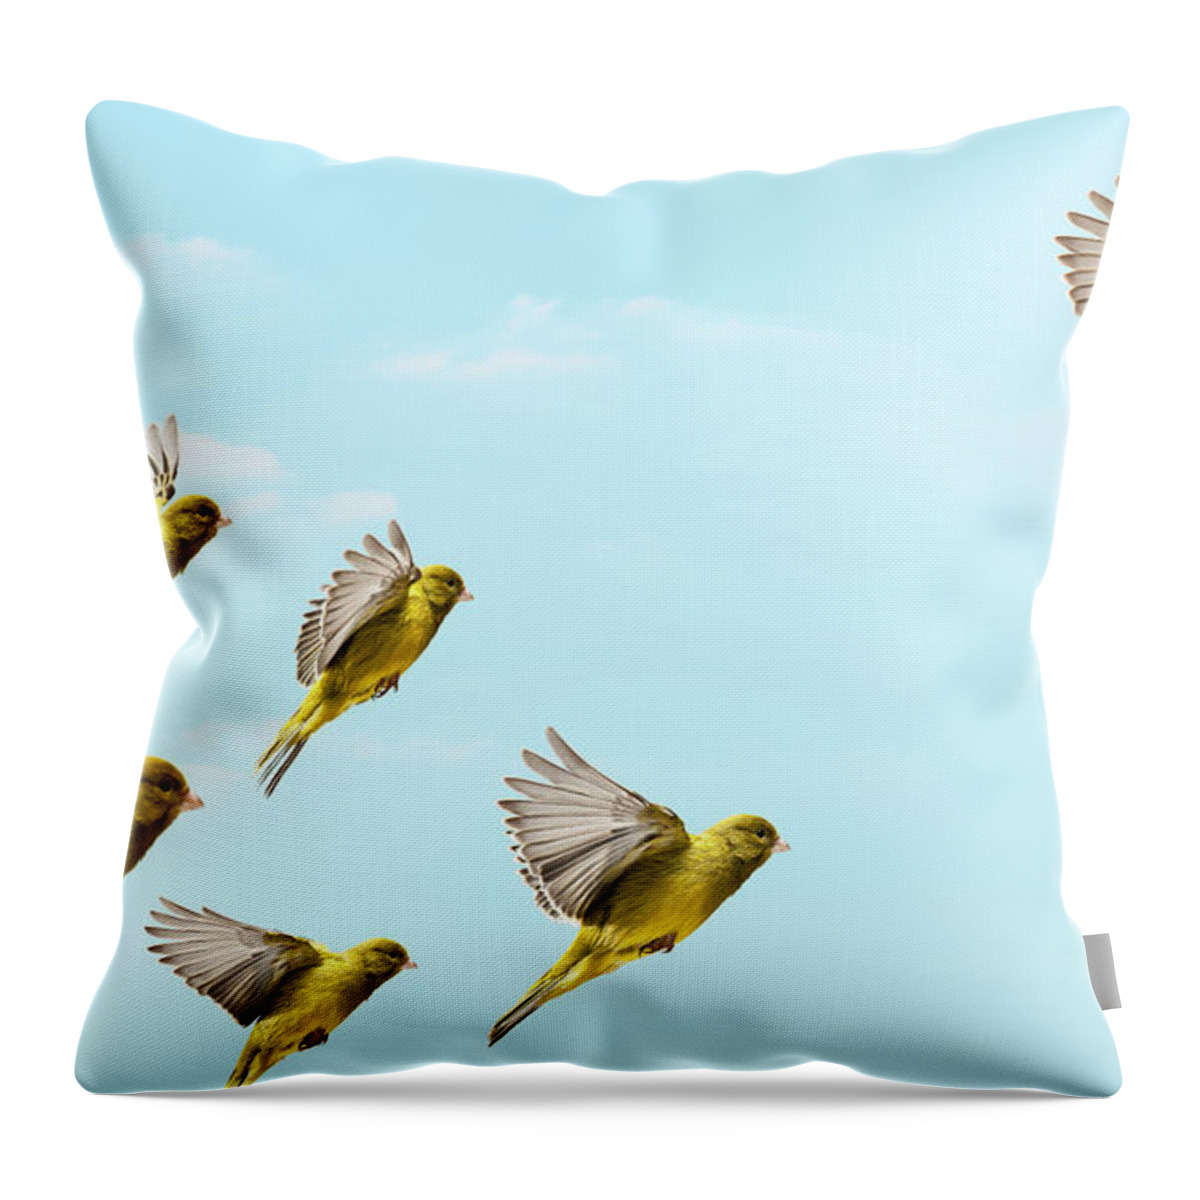 Animal Themes Throw Pillow featuring the photograph Yellow Bird Flying In-front And Higher by Pier